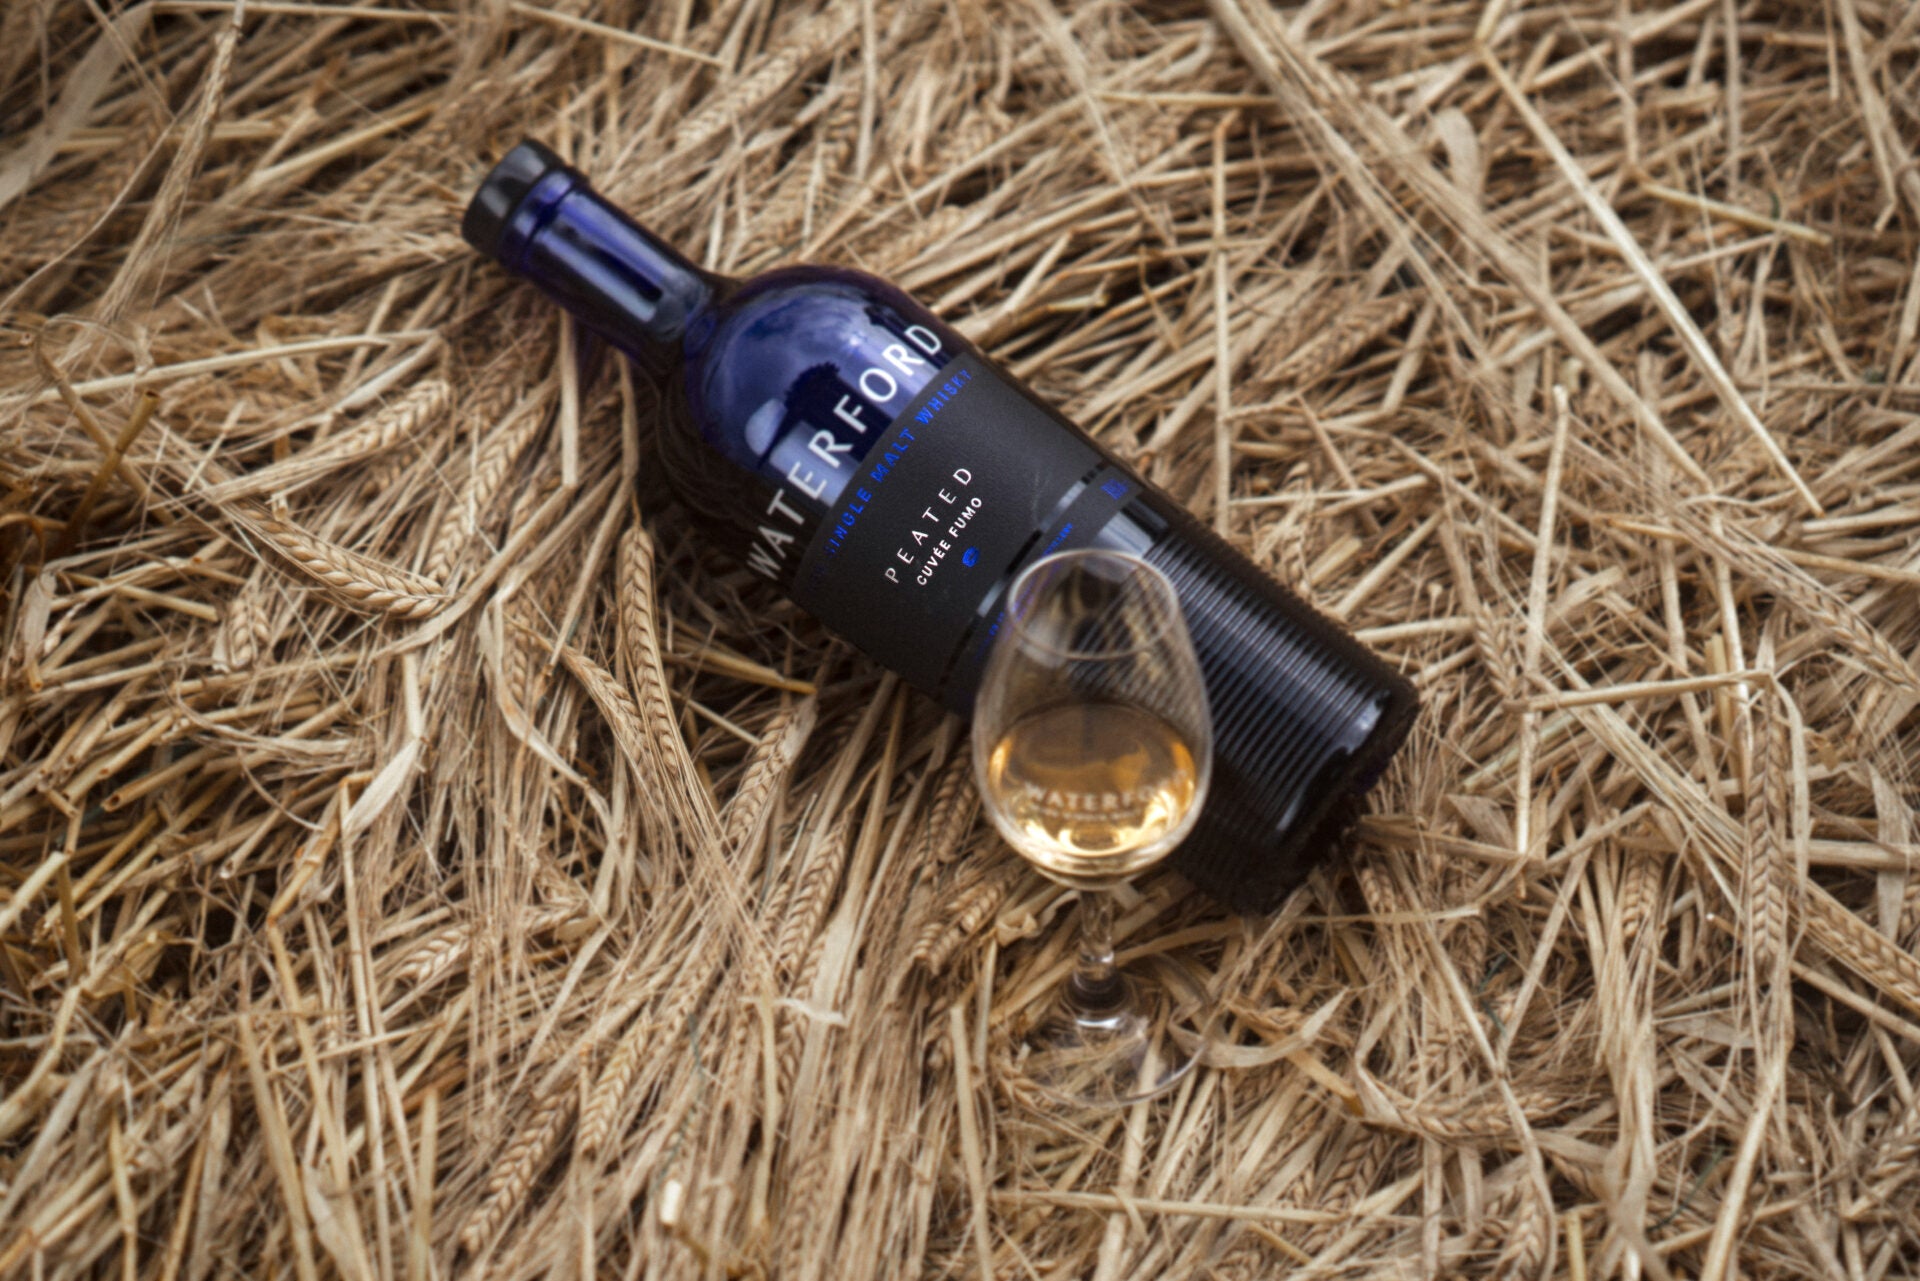 Organic Gaia: Edition 2.1 – Waterford Whisky